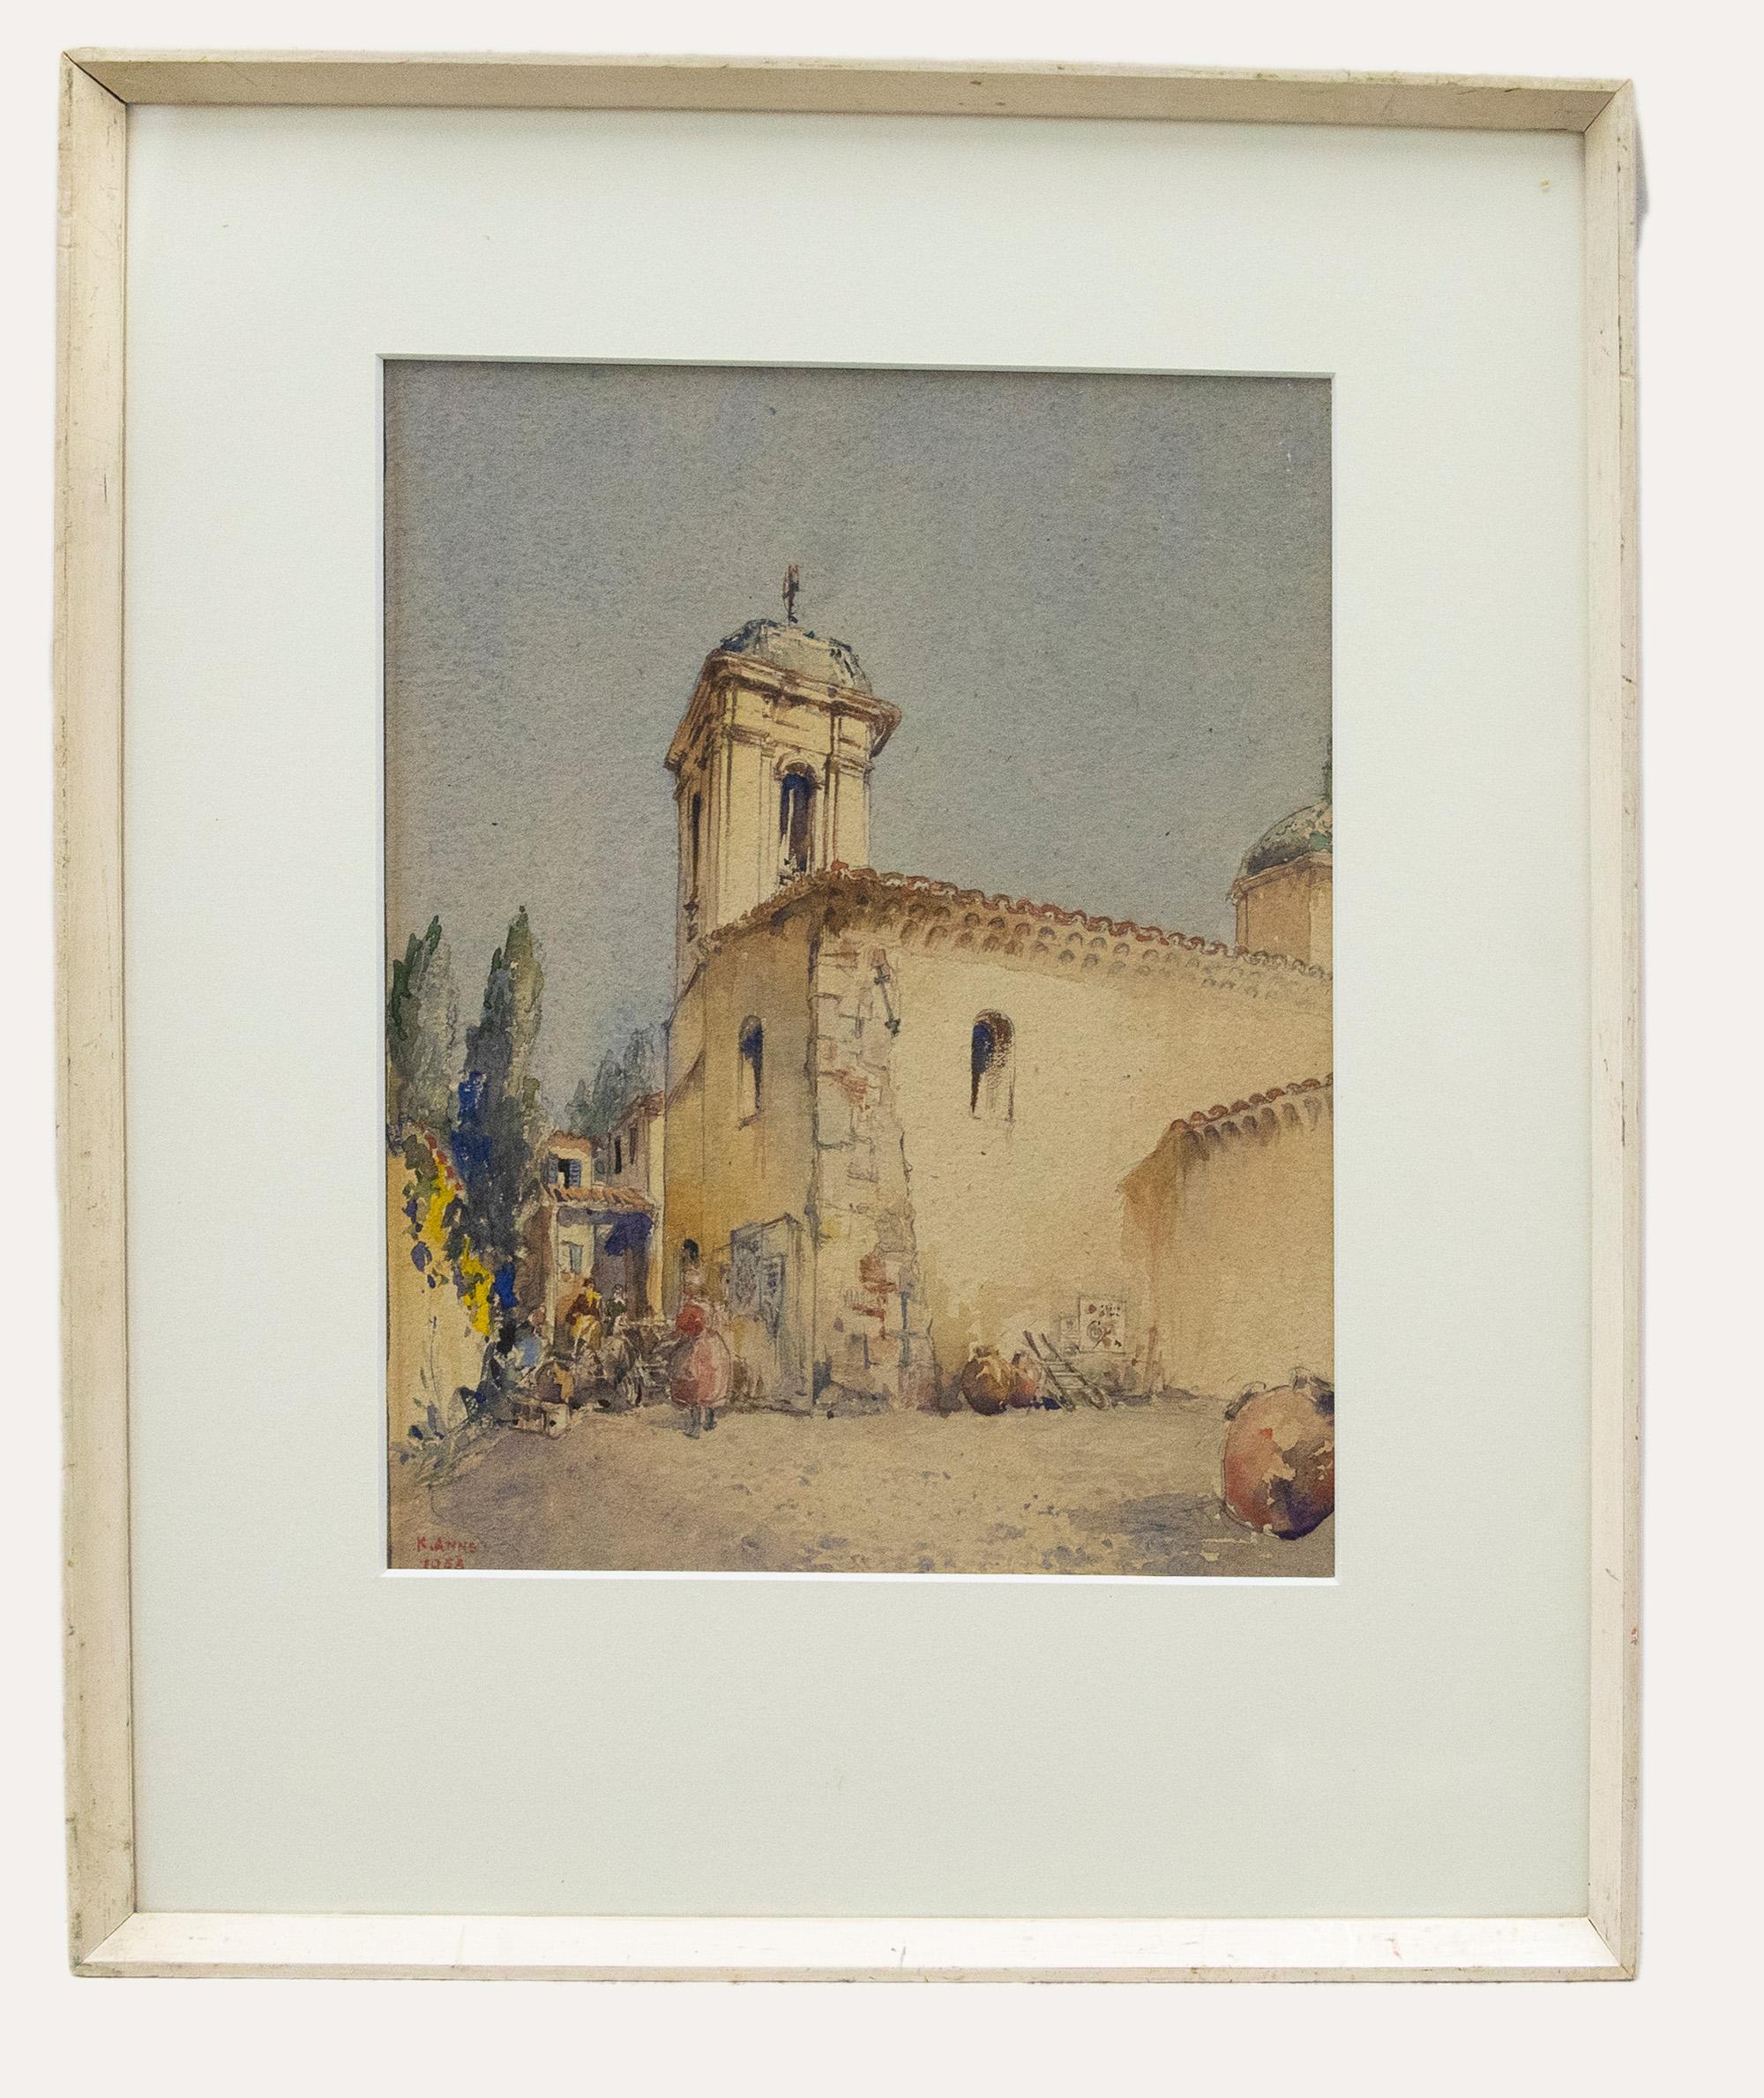 Unknown Landscape Art - Kenneth Anns (1891-1962) - Framed Watercolour, Figures Before a Tower